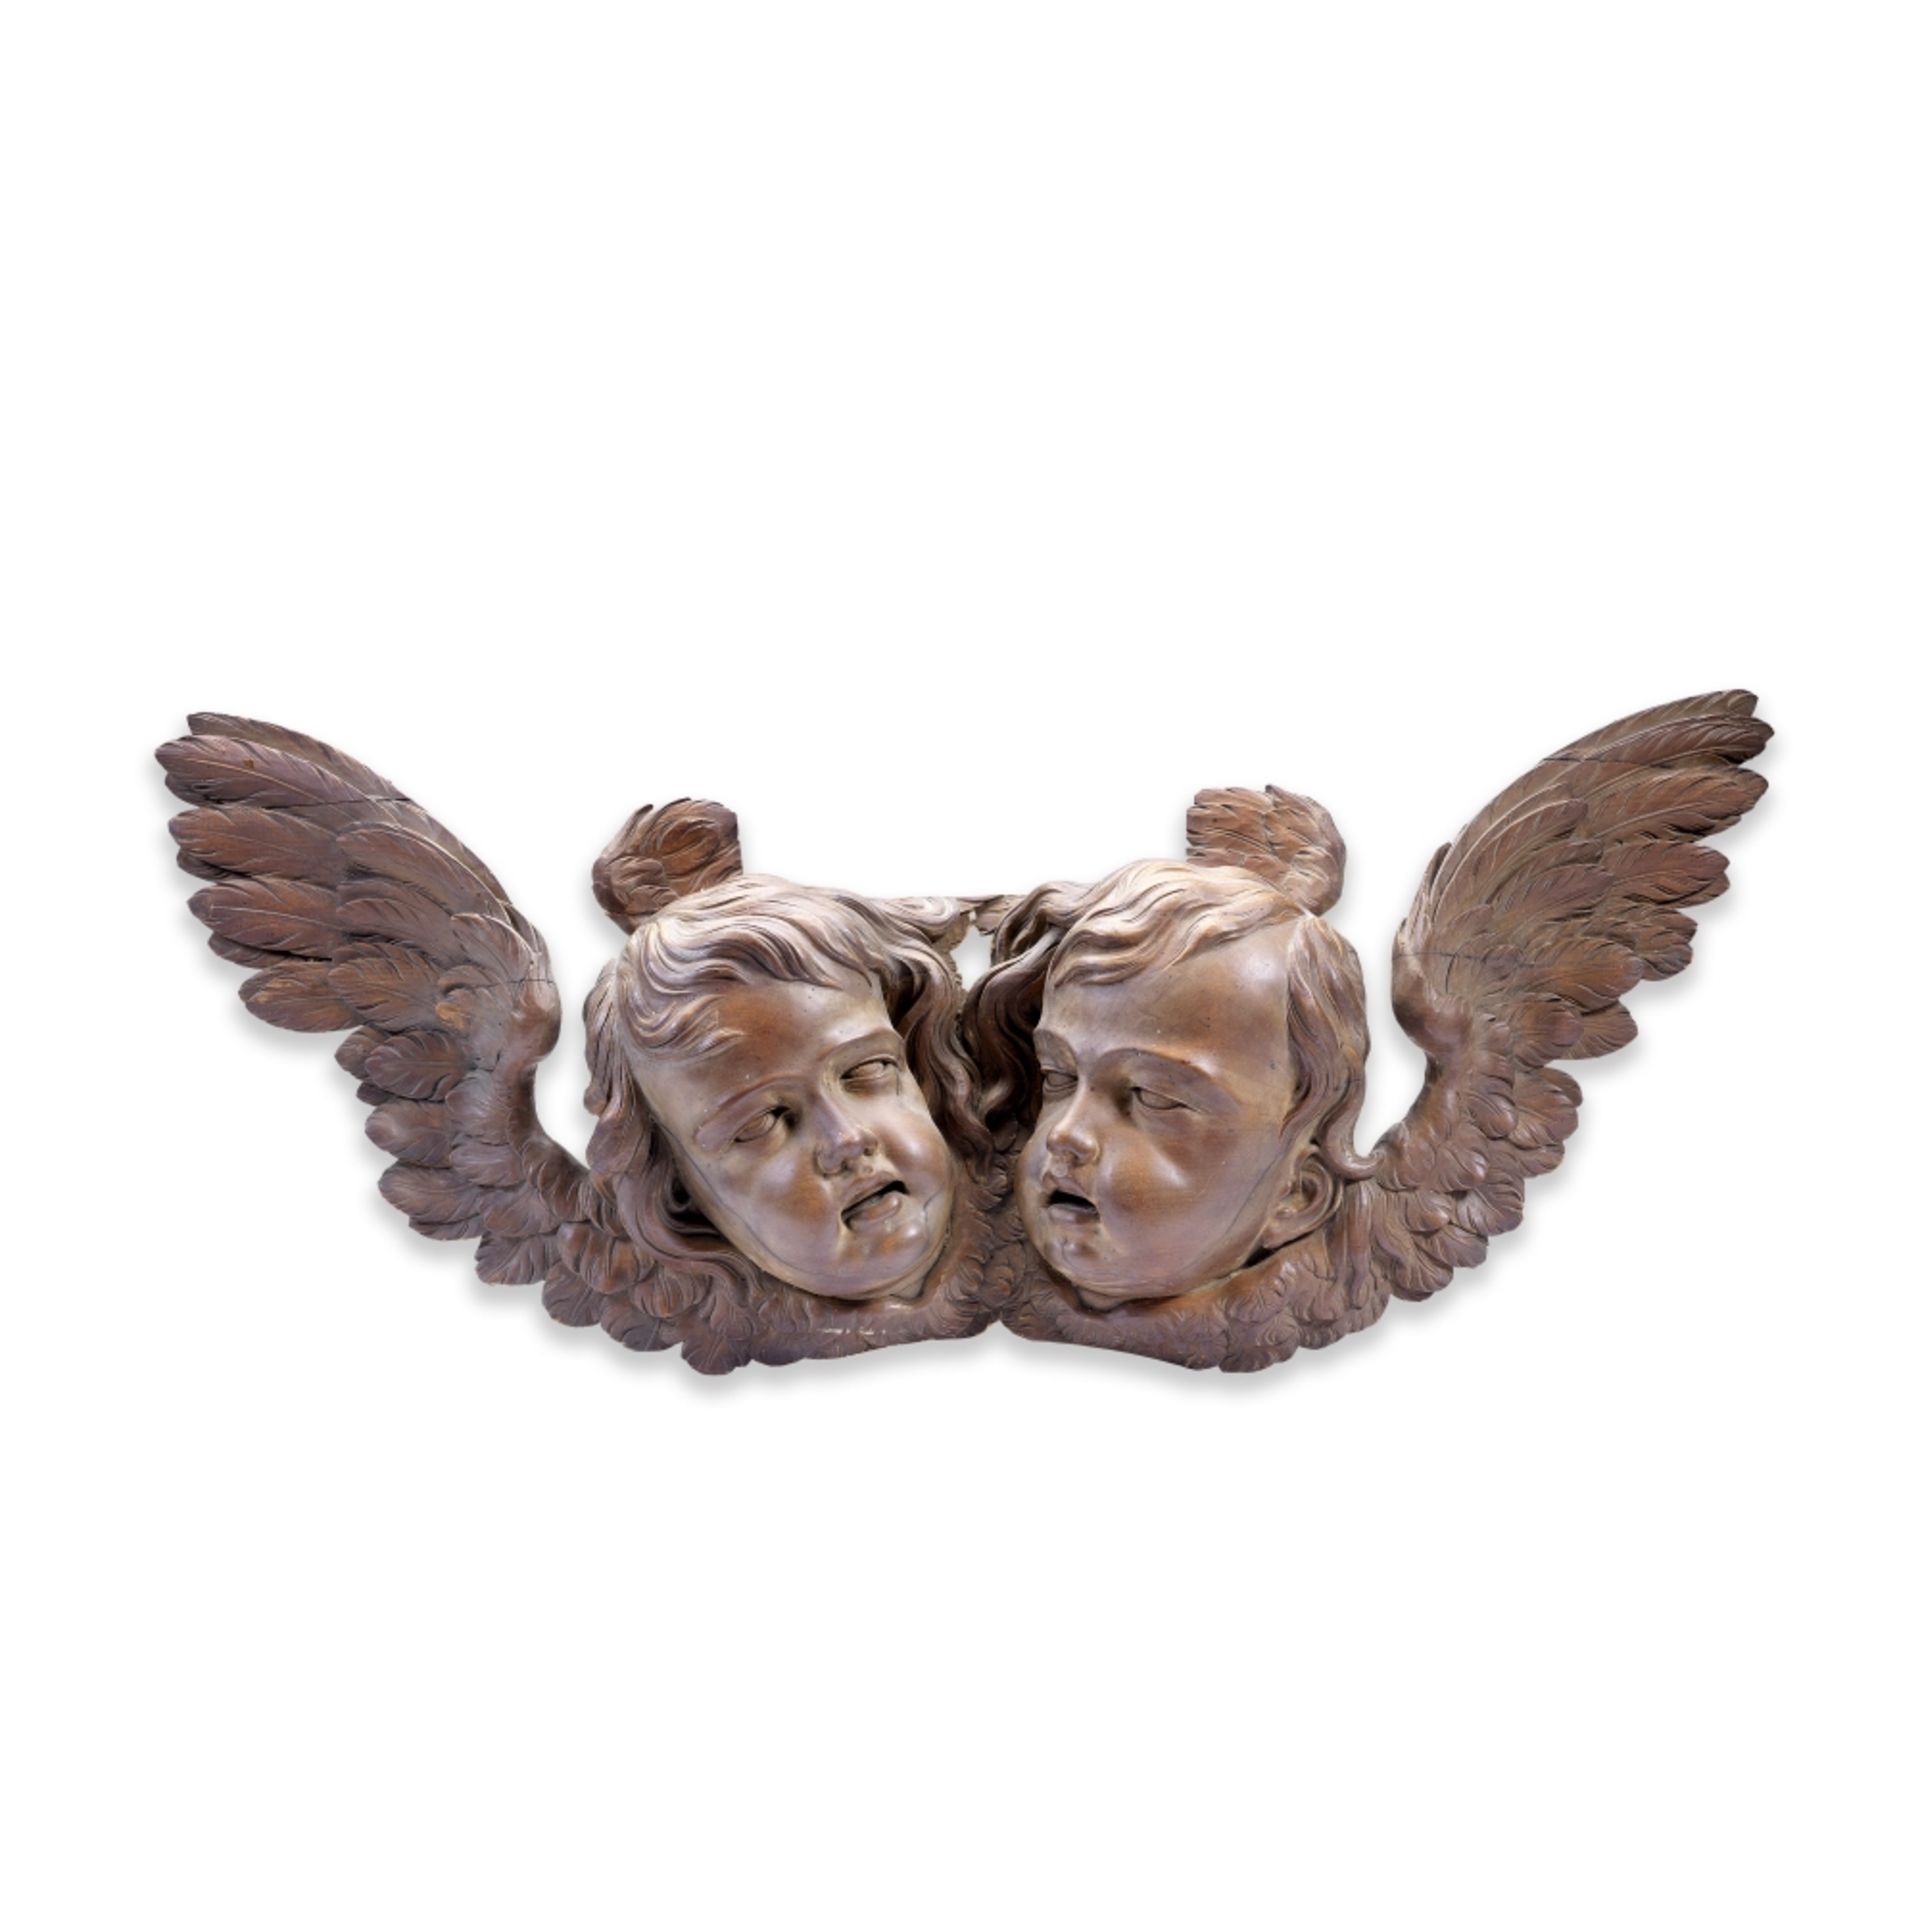 After Grinling Gibbons (Anglo-Dutch, 1648-1721): A carved fruitwood applique of two puttos' heads...